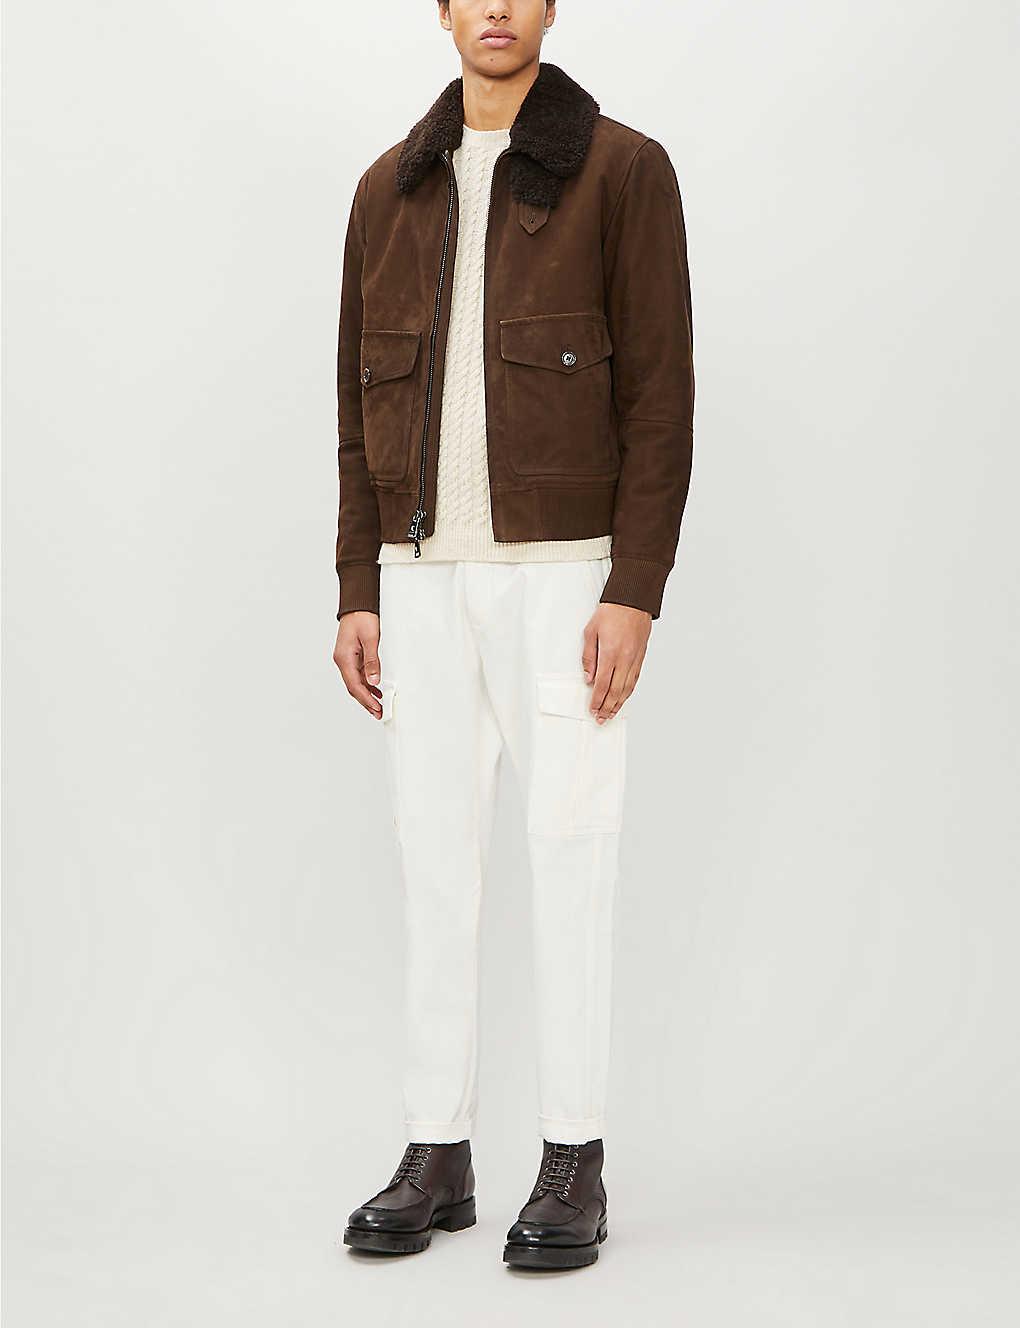 Ralph Lauren Purple Label Kingston Suede And Shearling Bomber Jacket in  Brown for Men | Lyst